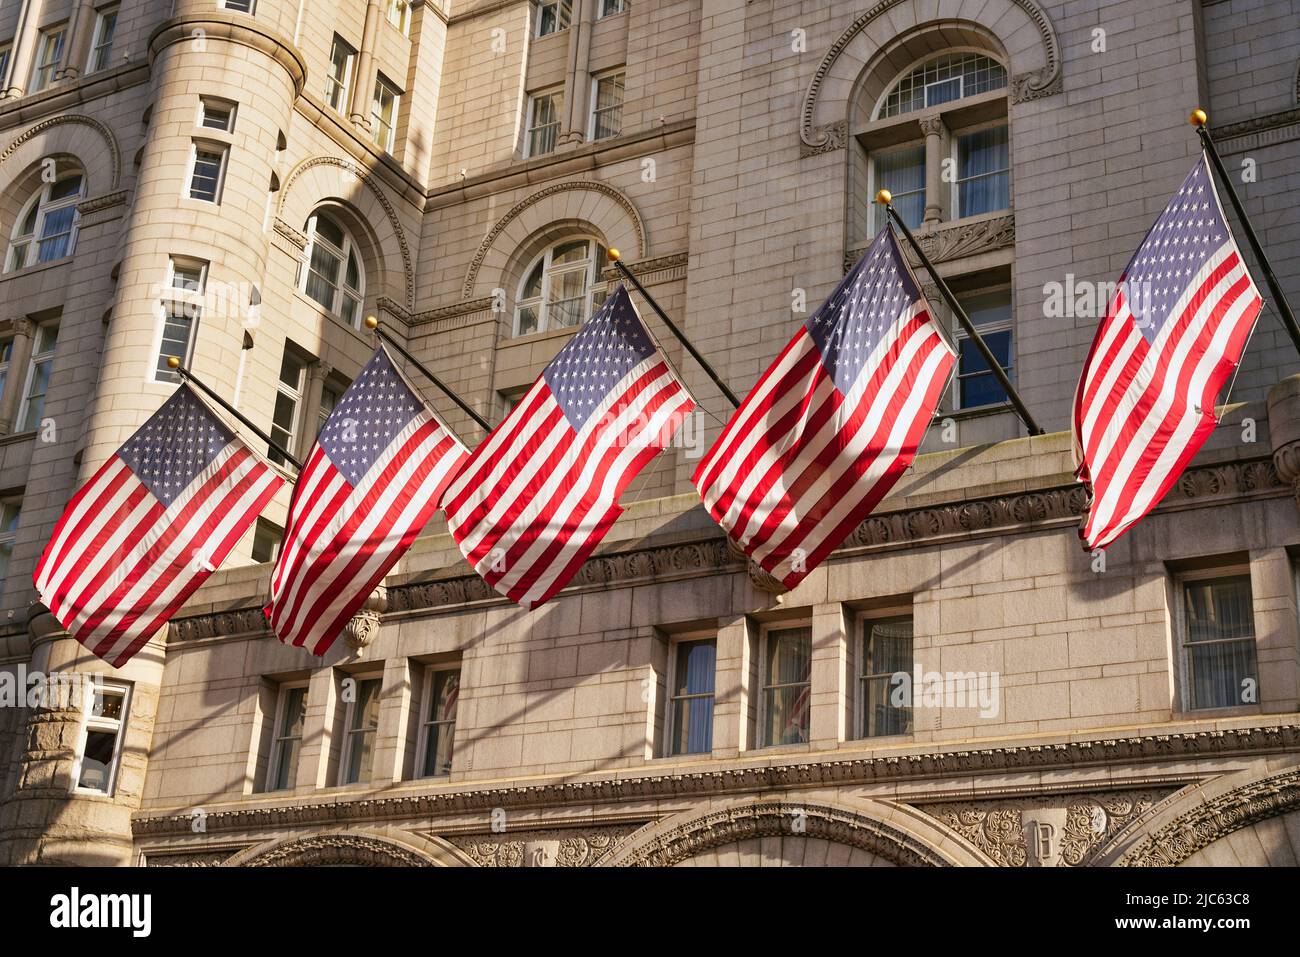 US flags on the old post office building in Washington, D.C., USA. US American flags with stars and stripes in the sunlight. Stock Photo